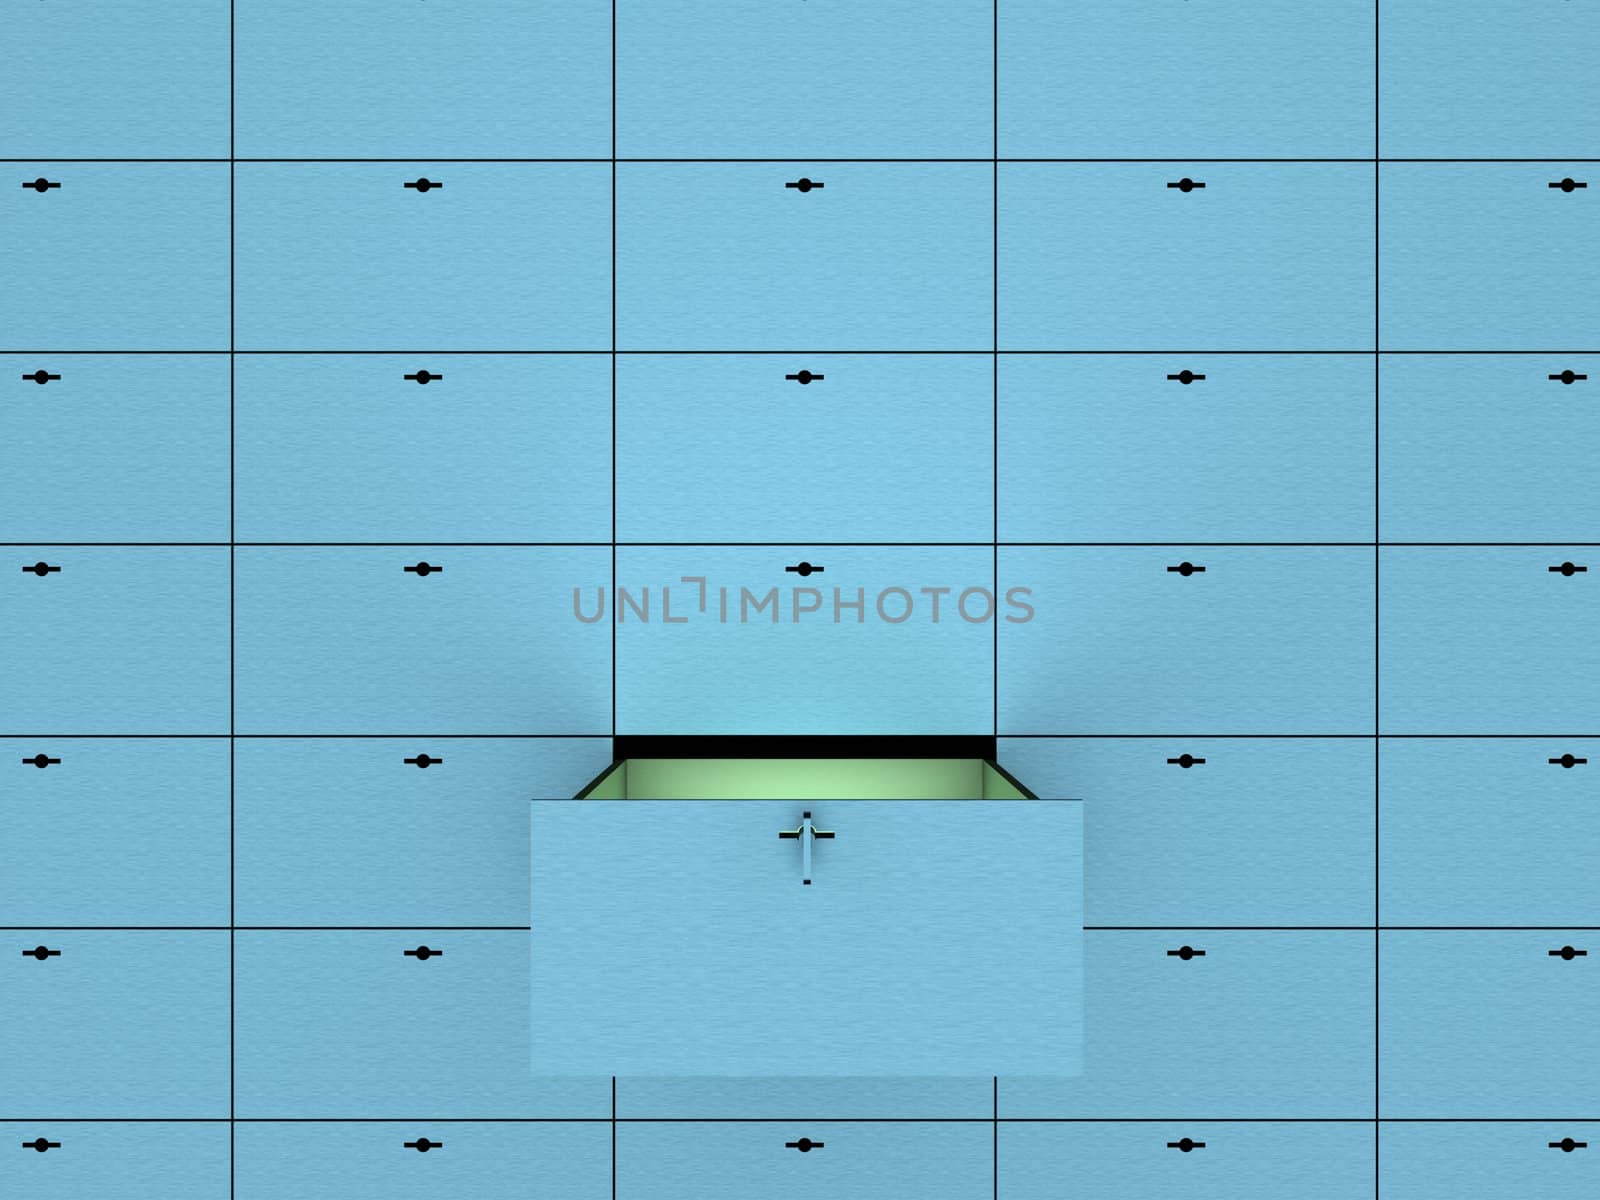 Open cell in safety deposit box. 3D image.